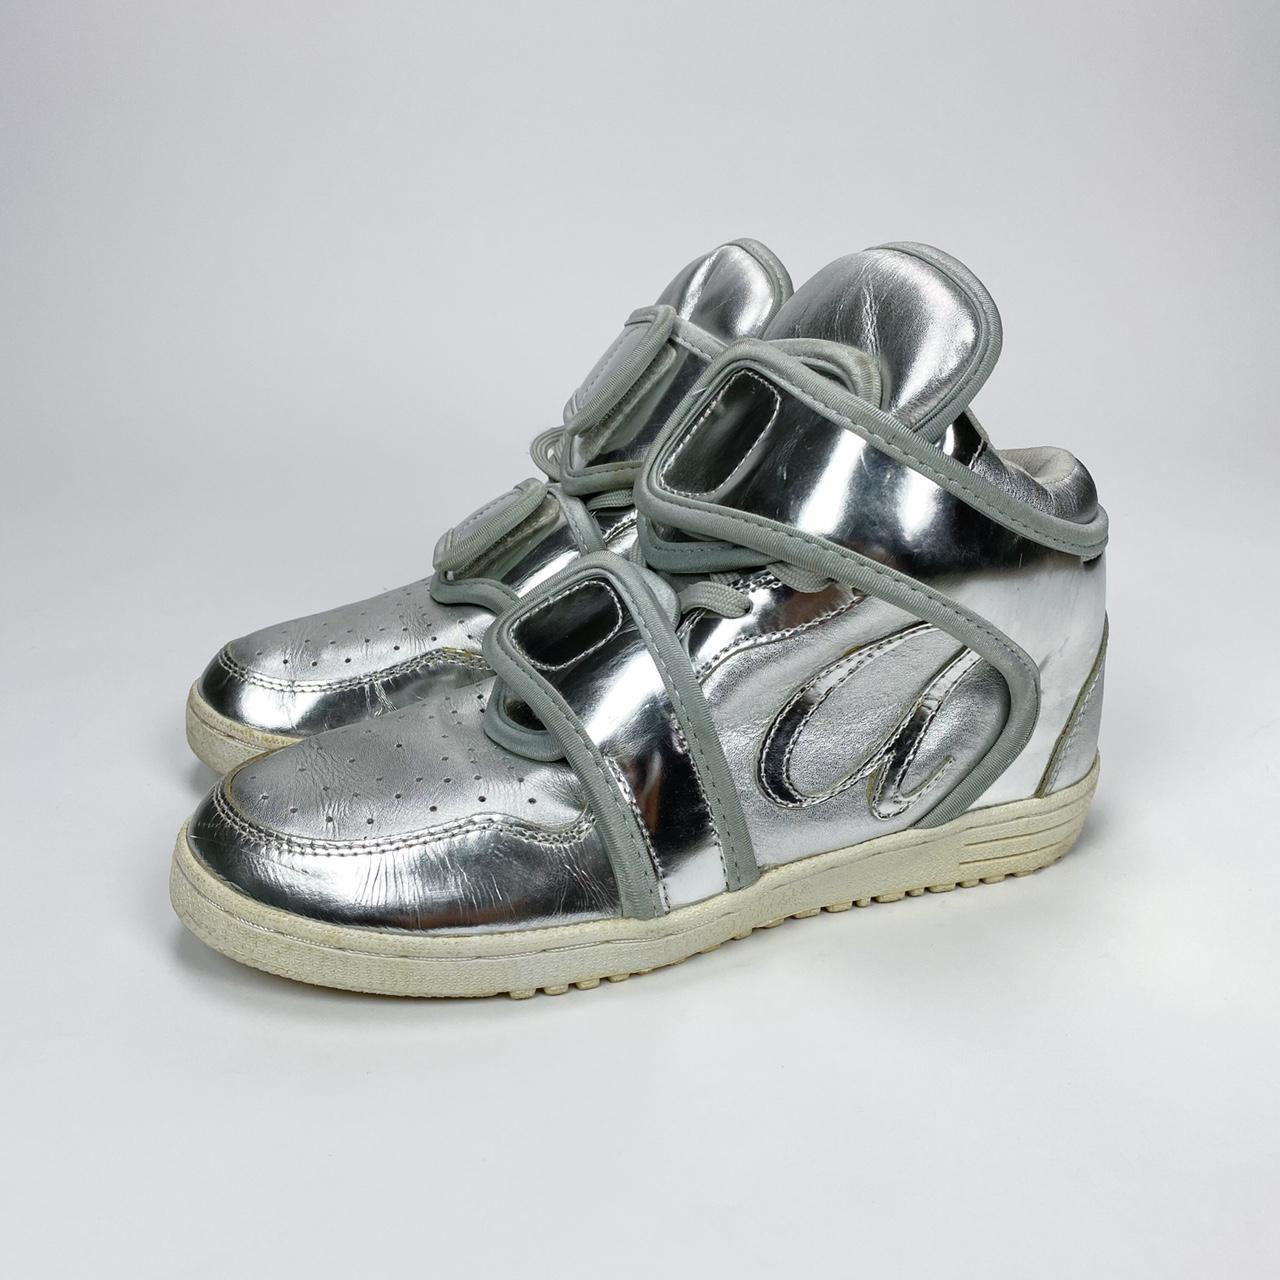 Product Image 1 - Vintage Ato Matsumoto sneaker 

Inspired